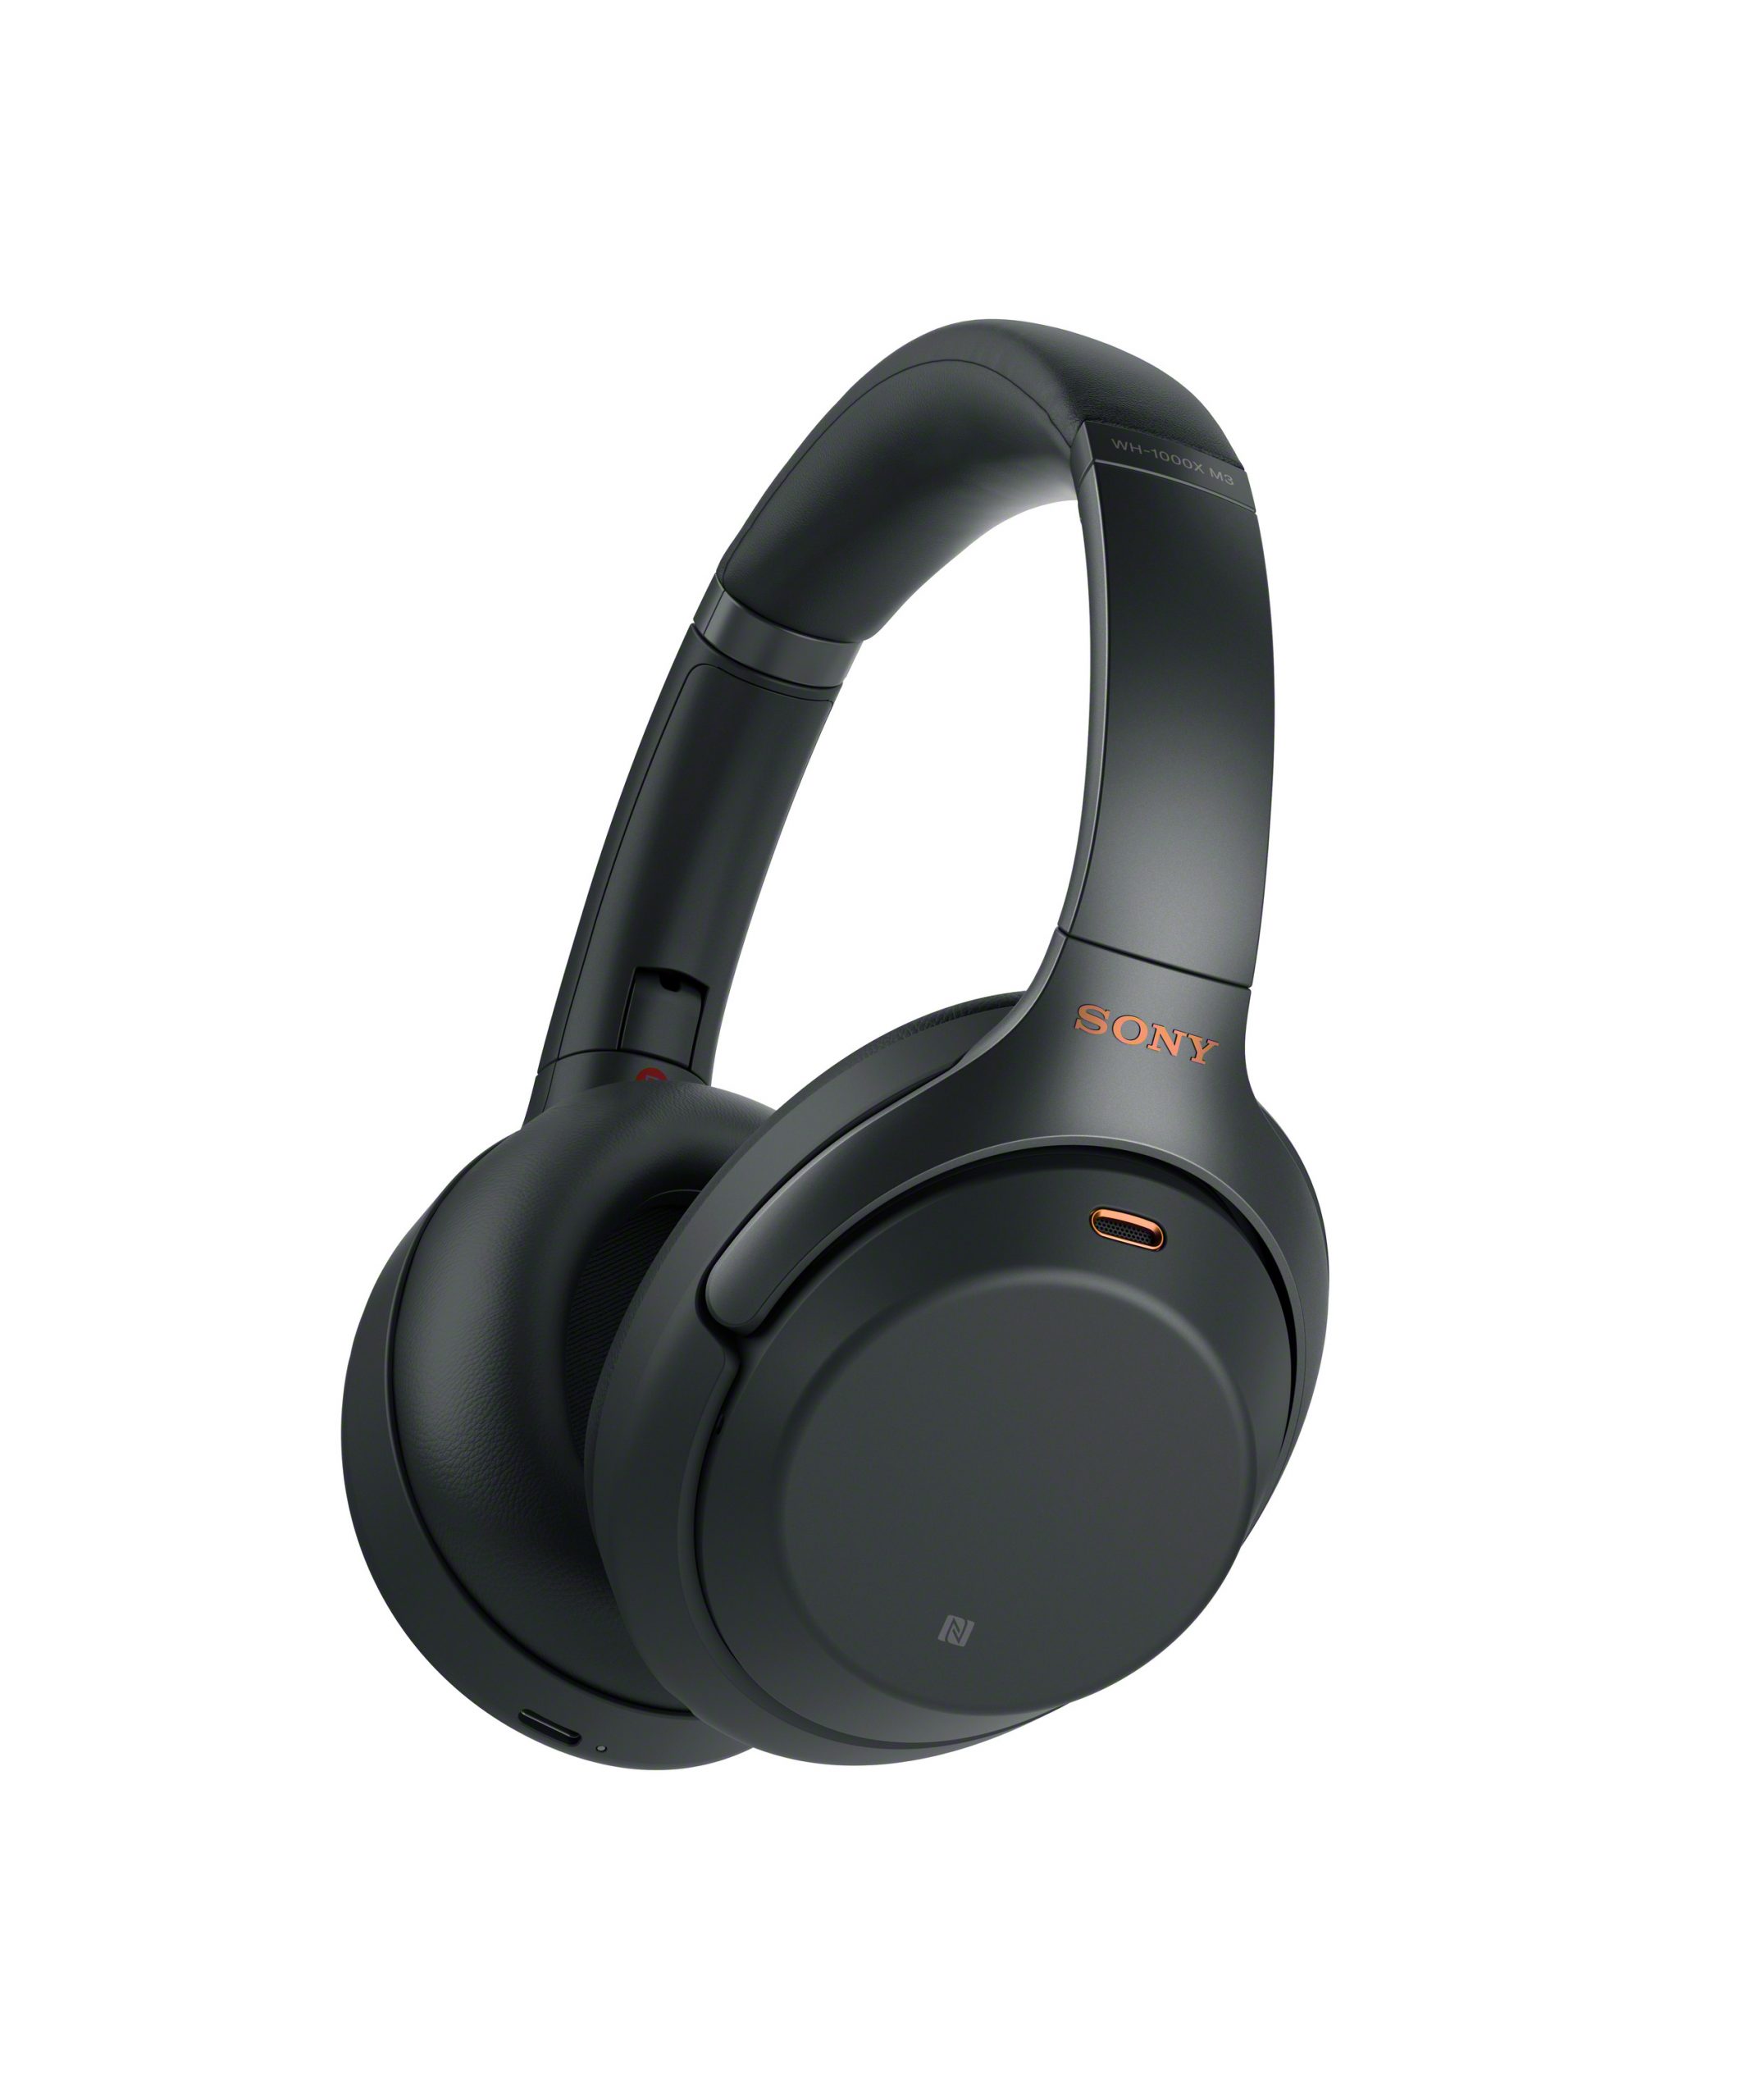 Lose Yourself In The Music With The Sony WH-1000XM3 Headphones From BestBuy